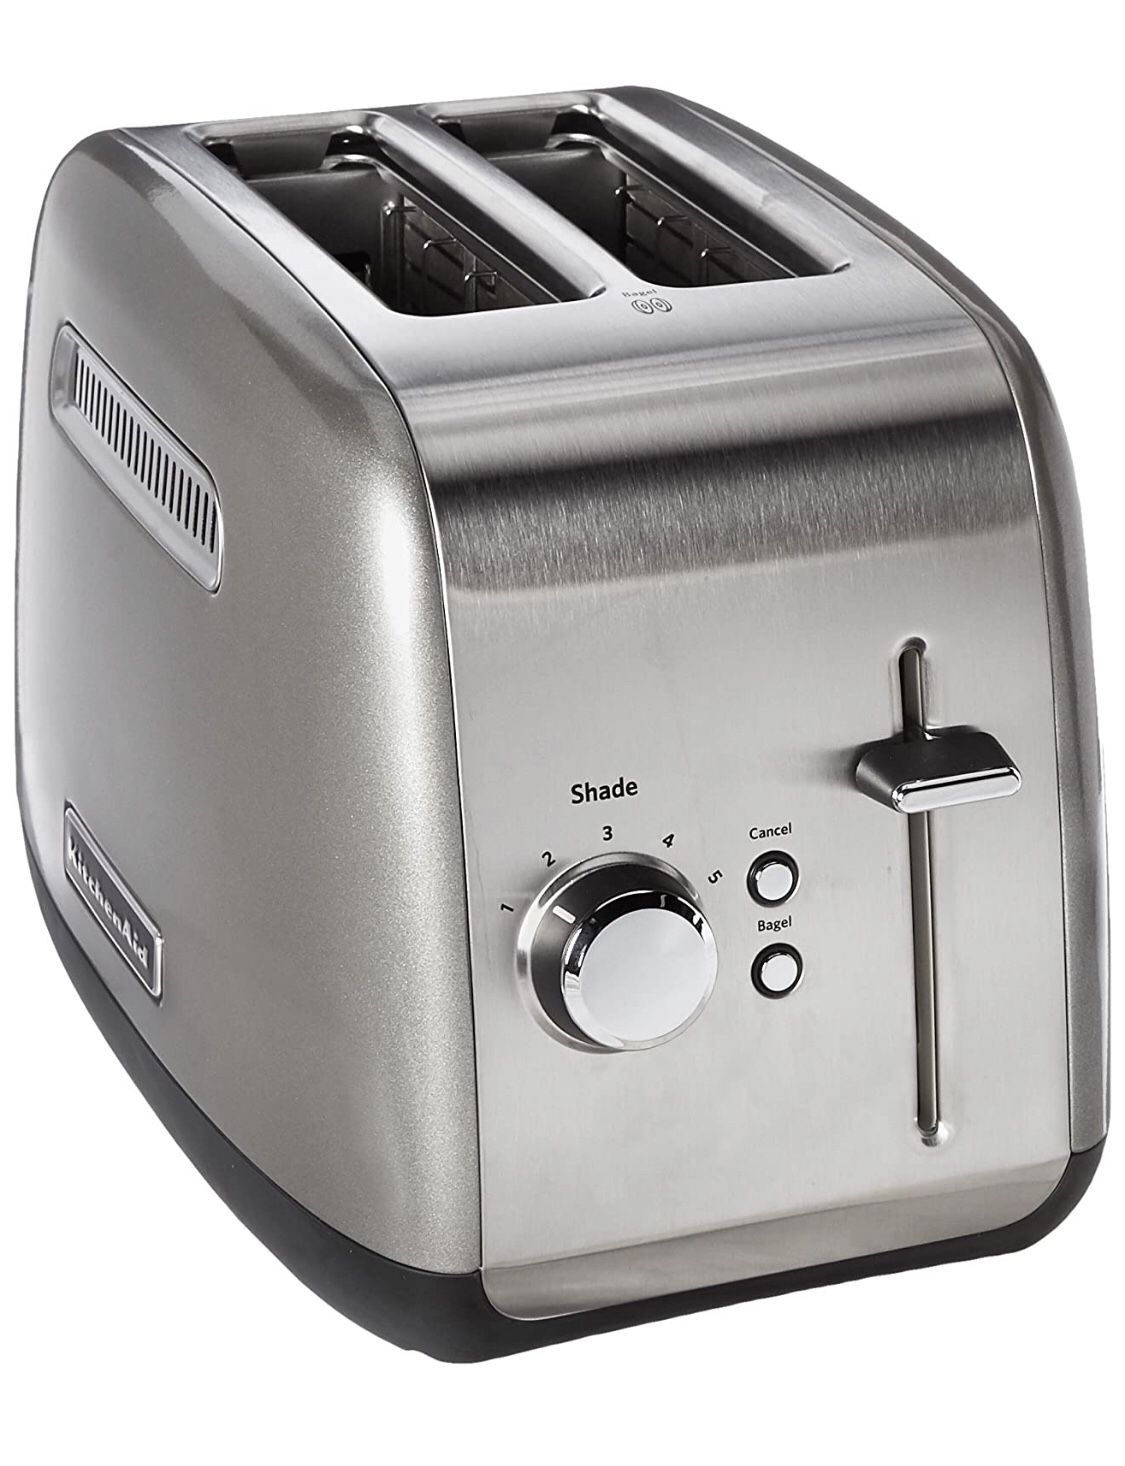 Kitchenaid Toaster - Brand New Original Package - NIB - For breads and bagels.